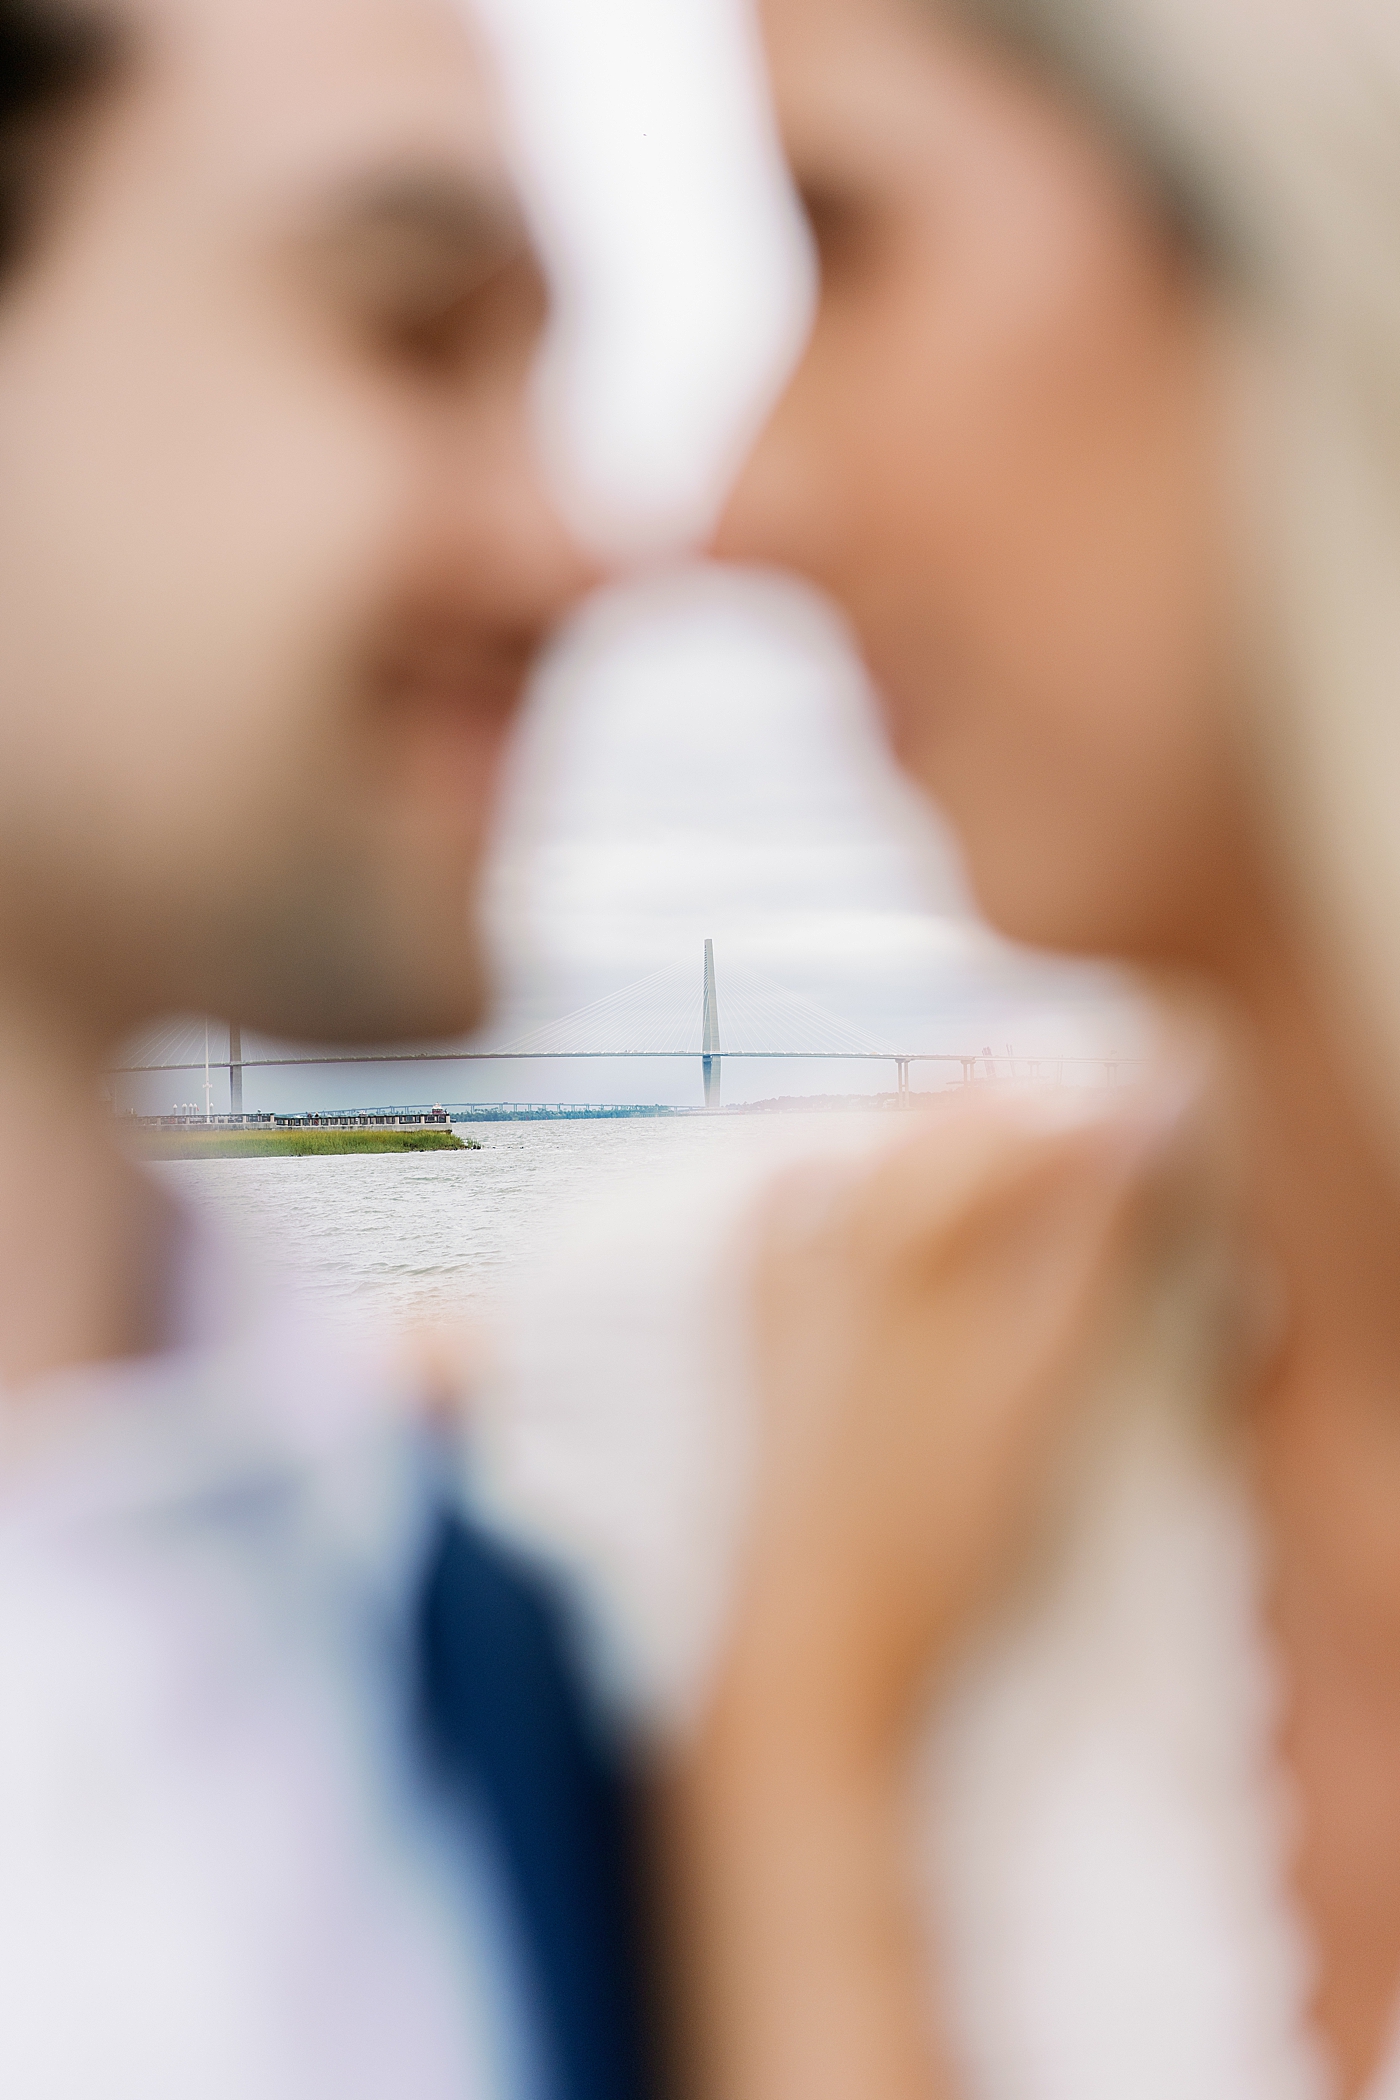 Couple with noses together blurred with charleston bridge in the background | Image by Annie Laura Photo